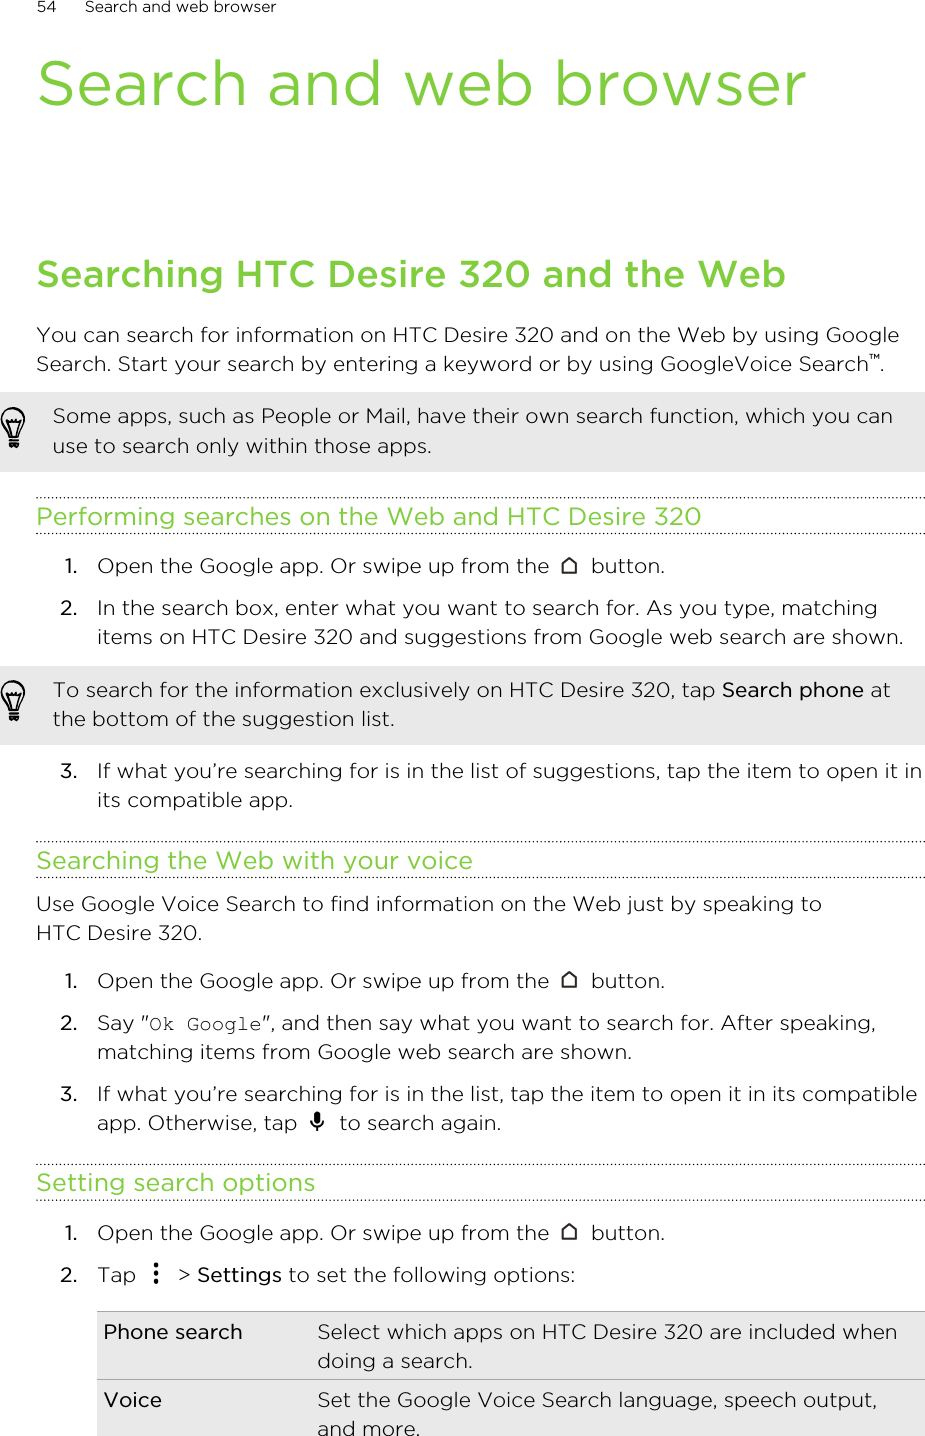 Search and web browserSearching HTC Desire 320 and the WebYou can search for information on HTC Desire 320 and on the Web by using GoogleSearch. Start your search by entering a keyword or by using GoogleVoice Search™.Some apps, such as People or Mail, have their own search function, which you canuse to search only within those apps.Performing searches on the Web and HTC Desire 3201. Open the Google app. Or swipe up from the   button.2. In the search box, enter what you want to search for. As you type, matchingitems on HTC Desire 320 and suggestions from Google web search are shown.To search for the information exclusively on HTC Desire 320, tap Search phone atthe bottom of the suggestion list.3. If what you’re searching for is in the list of suggestions, tap the item to open it inits compatible app.Searching the Web with your voiceUse Google Voice Search to find information on the Web just by speaking toHTC Desire 320.1. Open the Google app. Or swipe up from the   button.2. Say &quot;Ok Google&quot;, and then say what you want to search for. After speaking,matching items from Google web search are shown.3. If what you’re searching for is in the list, tap the item to open it in its compatibleapp. Otherwise, tap   to search again.Setting search options1. Open the Google app. Or swipe up from the   button.2. Tap   &gt; Settings to set the following options:Phone search Select which apps on HTC Desire 320 are included whendoing a search.Voice Set the Google Voice Search language, speech output,and more.54 Search and web browser